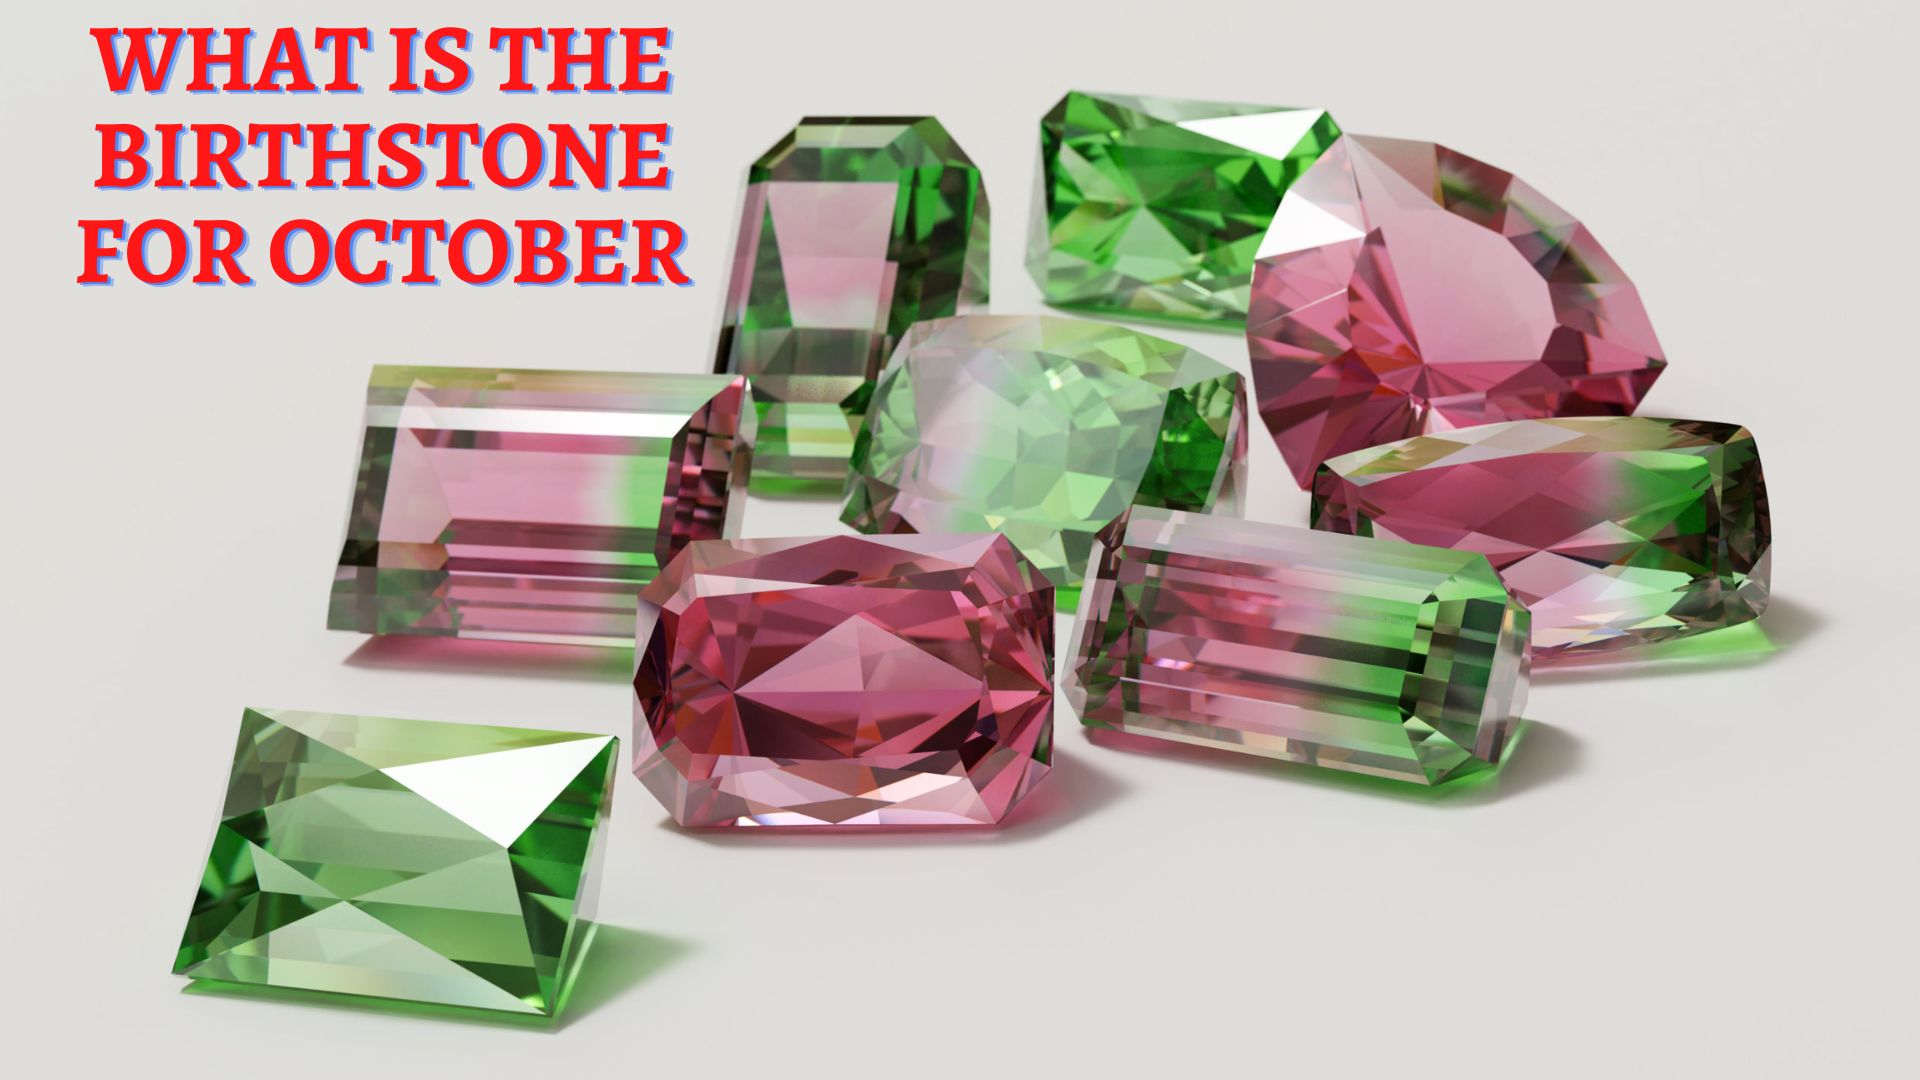 What Is The Birthstone For October?